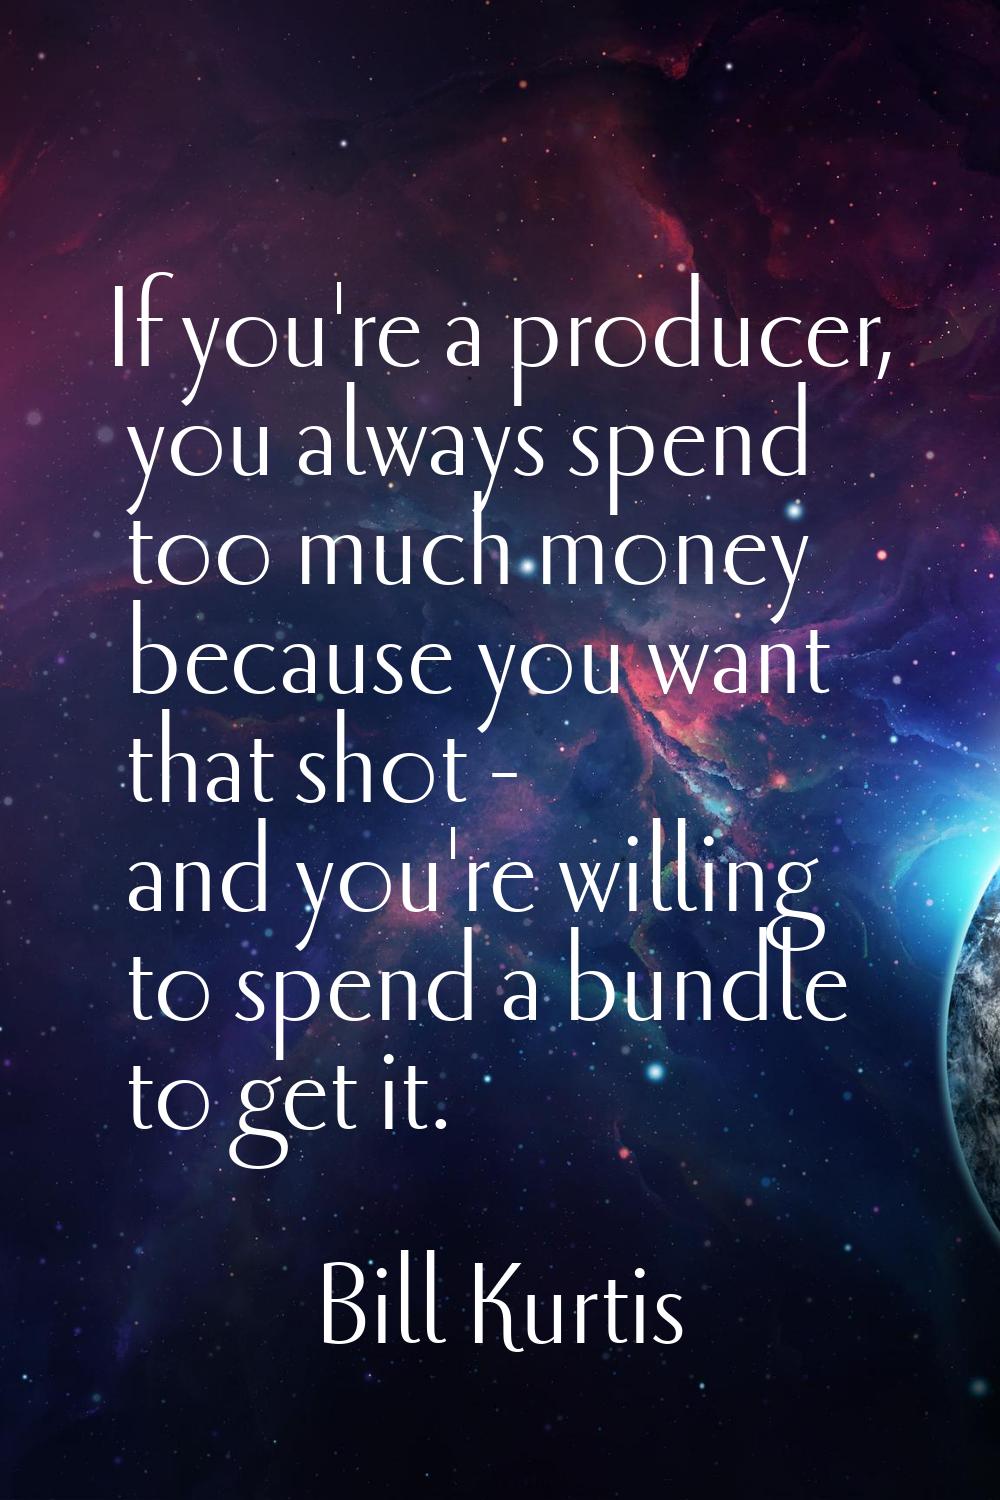 If you're a producer, you always spend too much money because you want that shot - and you're willi